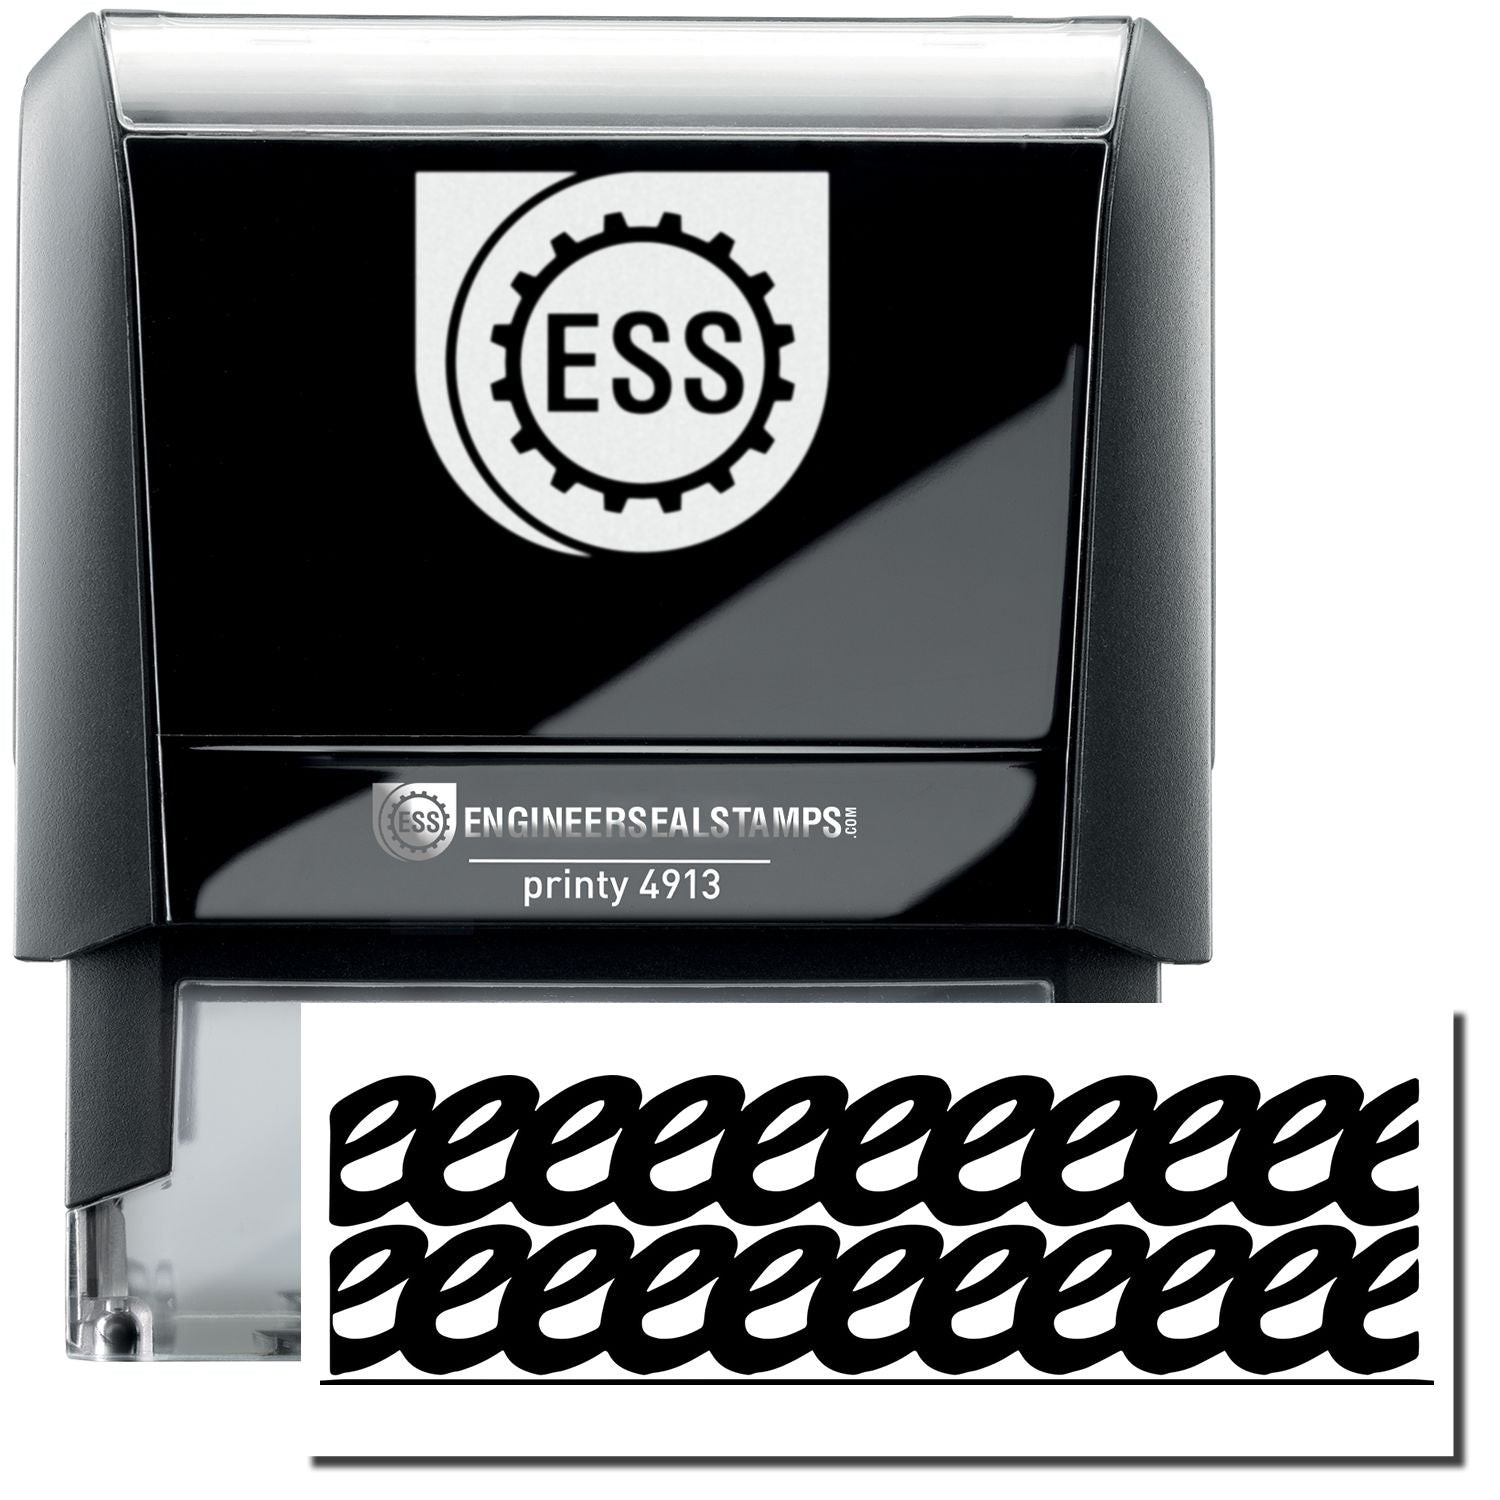 A self-inking stamp with a stamped image showing how the wrongly written texts can be hidden behind the image displayed by this strikeout stamp after stamping. It helps to cover up data or information that shouldn't be on a file or folder.